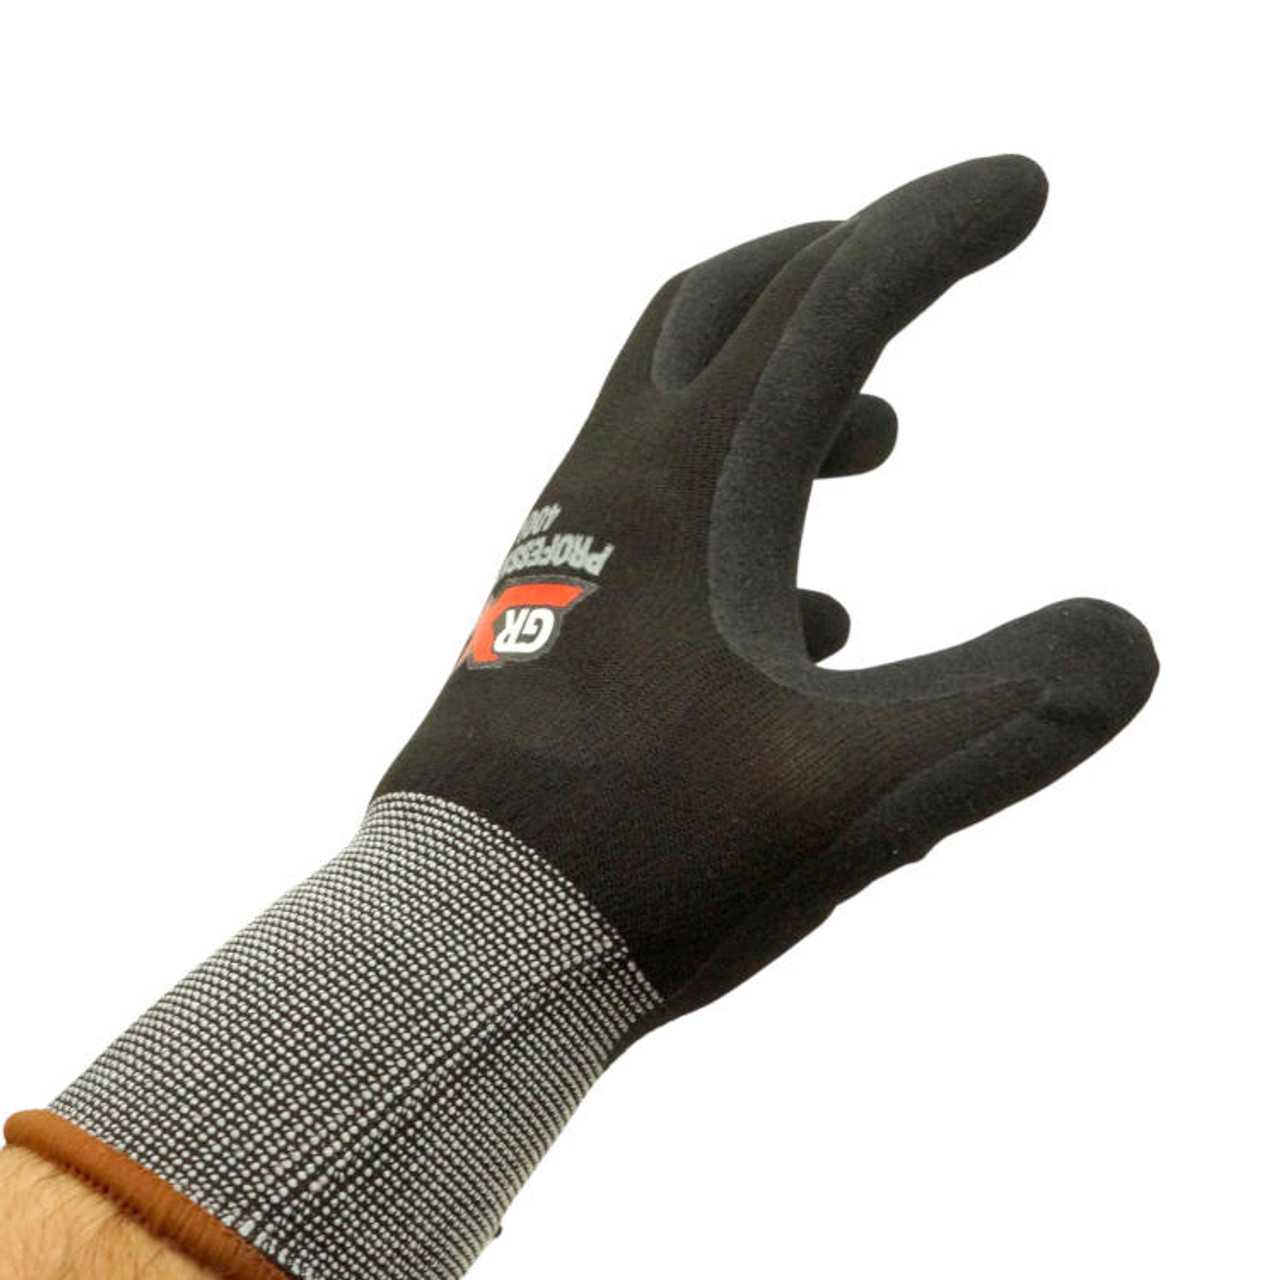 RAZOR X5 Cut Resistant Breathable Nitrile Coated Glove, Hand Protection